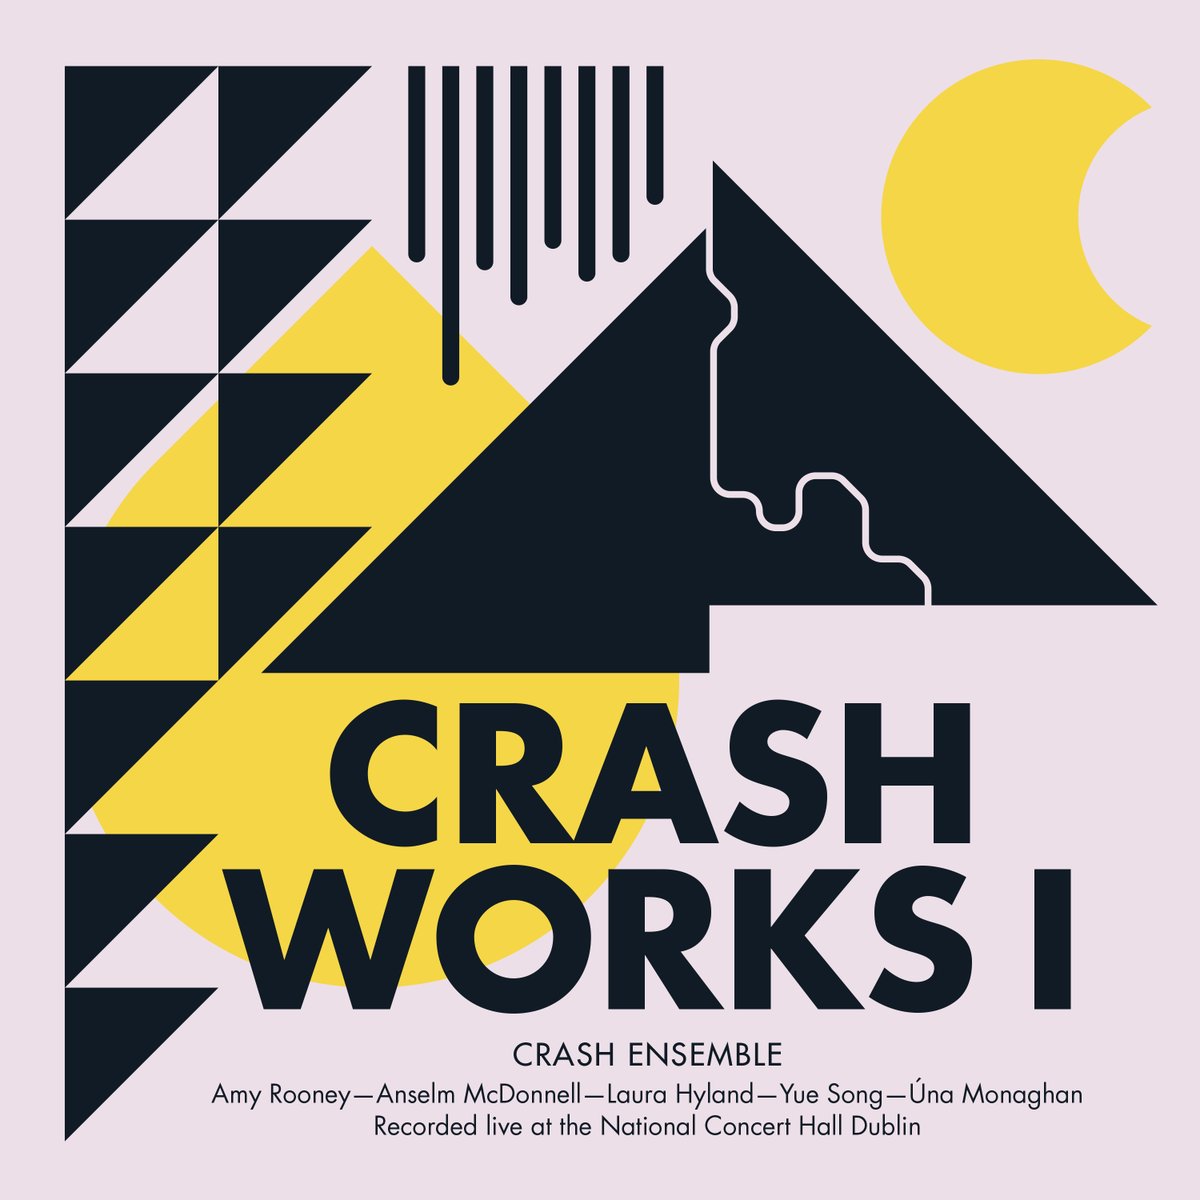 Album cover for Crash Works I on Crash Records. The design explores themes in the music from Amy Rooney, Anselm McDonnell, Laura Hyland, Yue Song, and Úna Monaghan. Crash Works is a partnership between @crashensemble and @NewMusicDublin